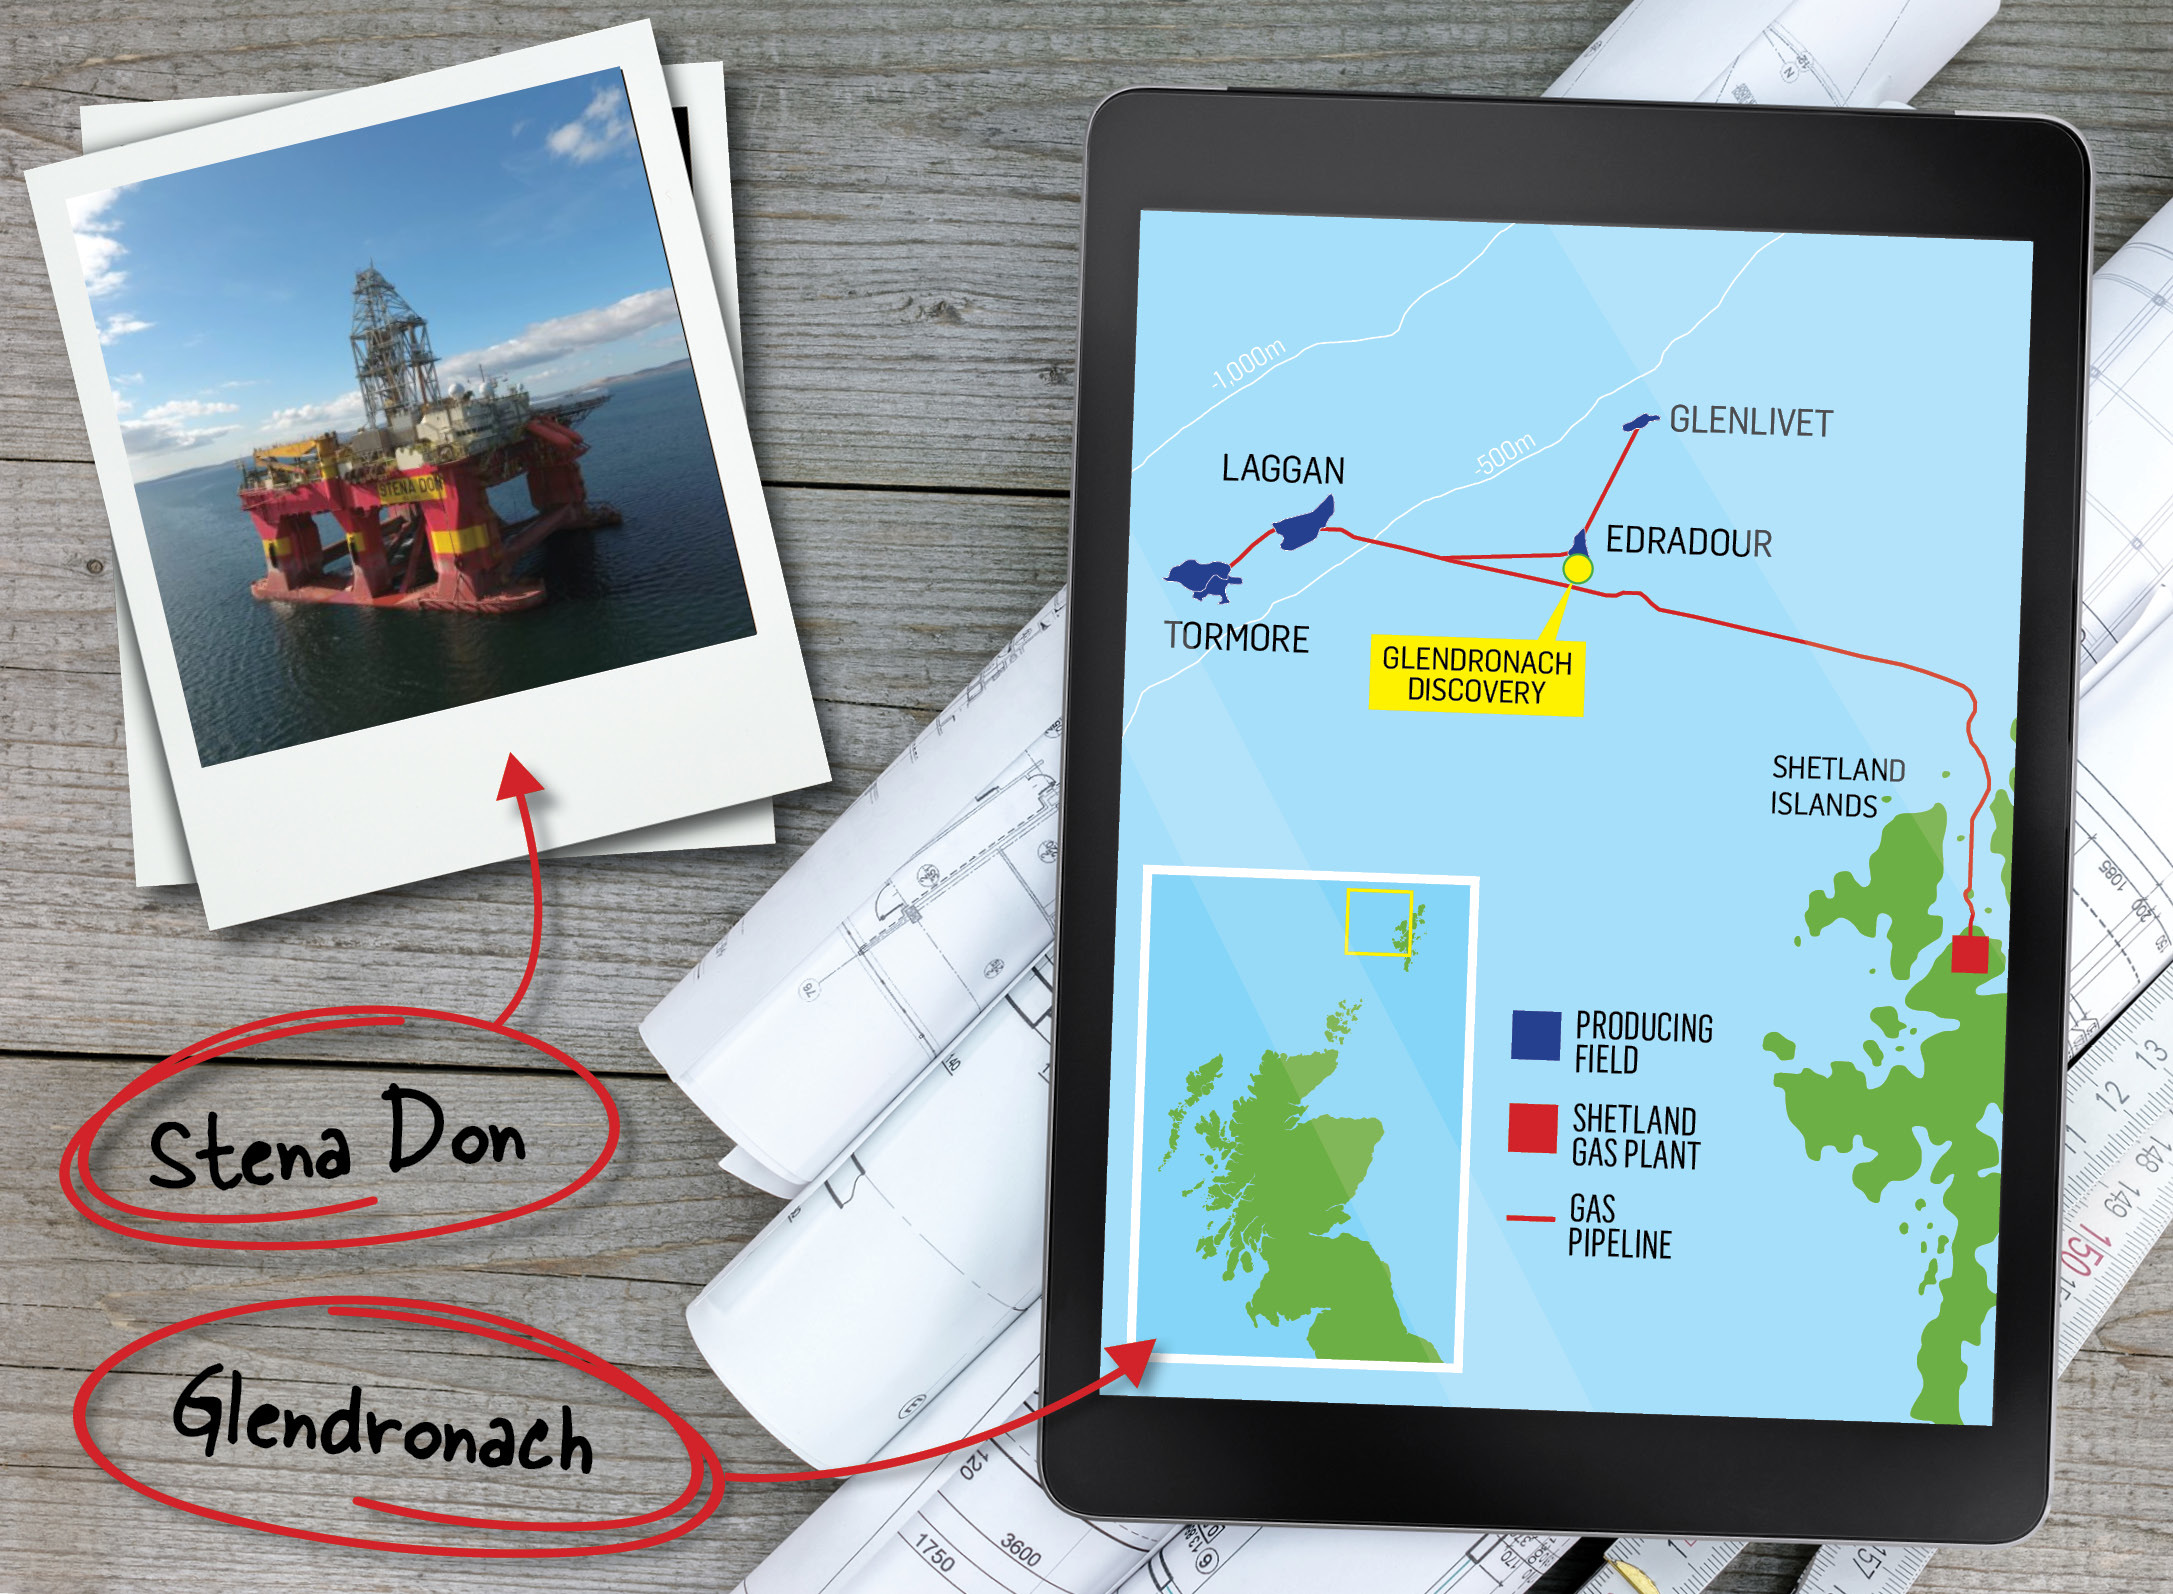 A map showing the location of the Glendronach discovery, which was drilled by the Stena Don rig.